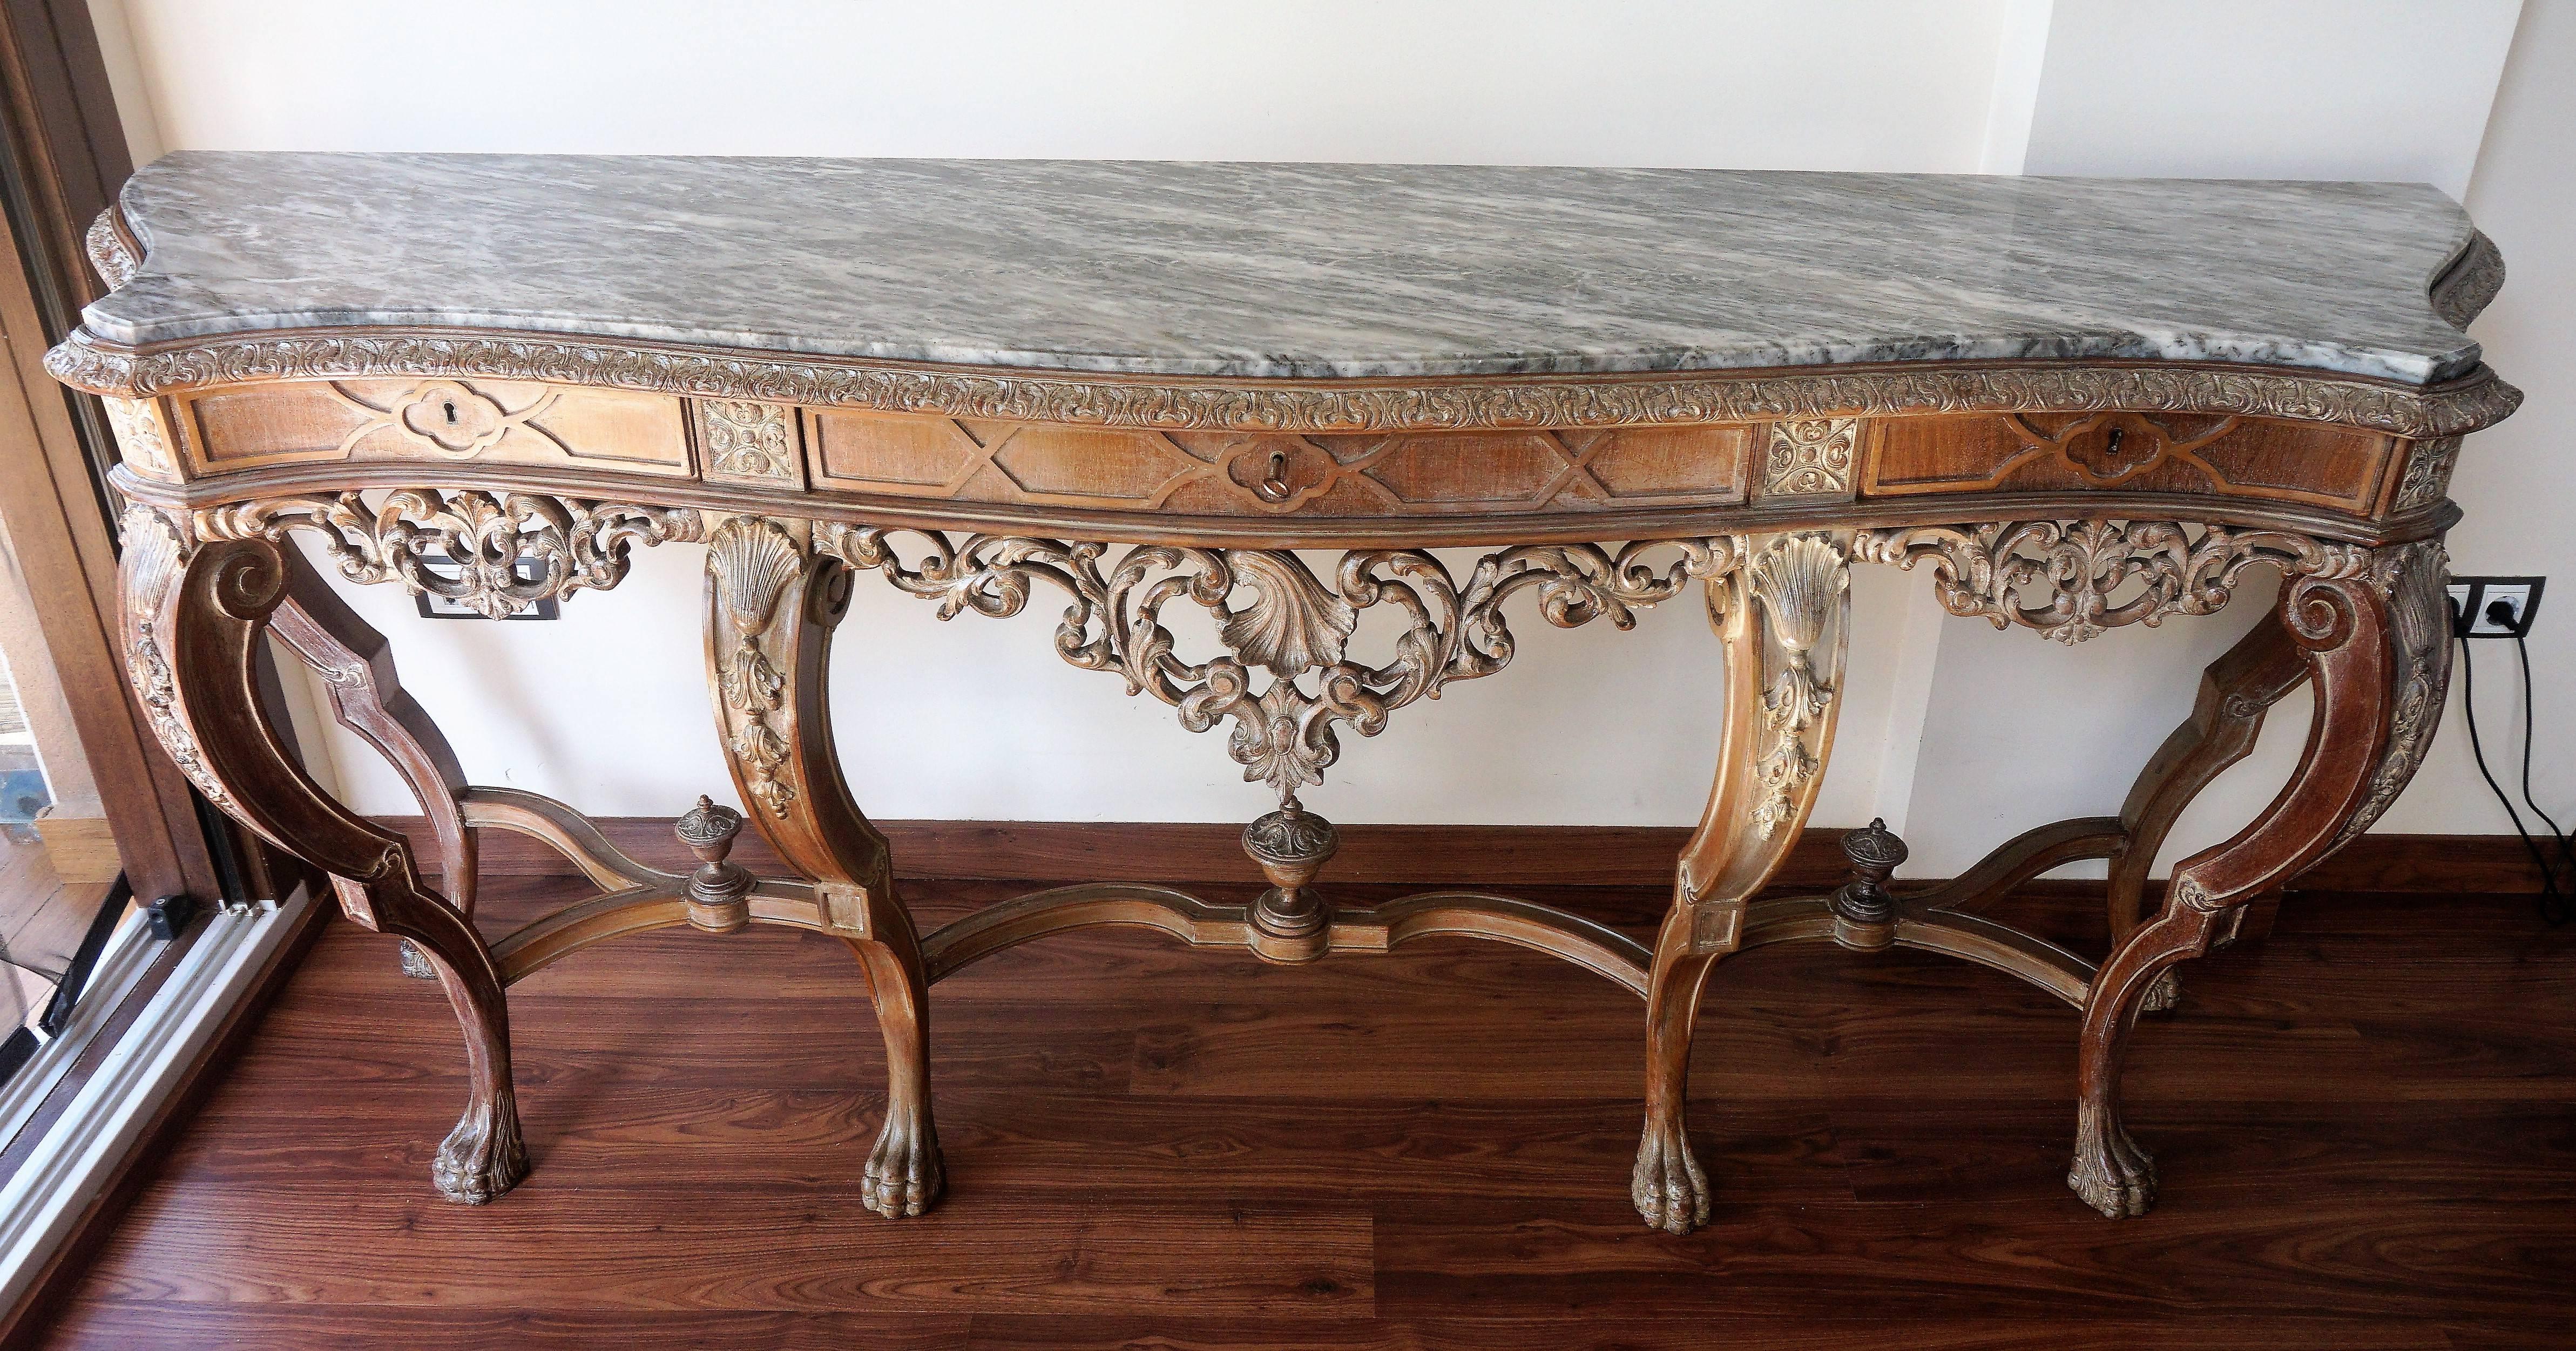 Baroque Spanish Console Table with Marble Top by Mariano Garcia